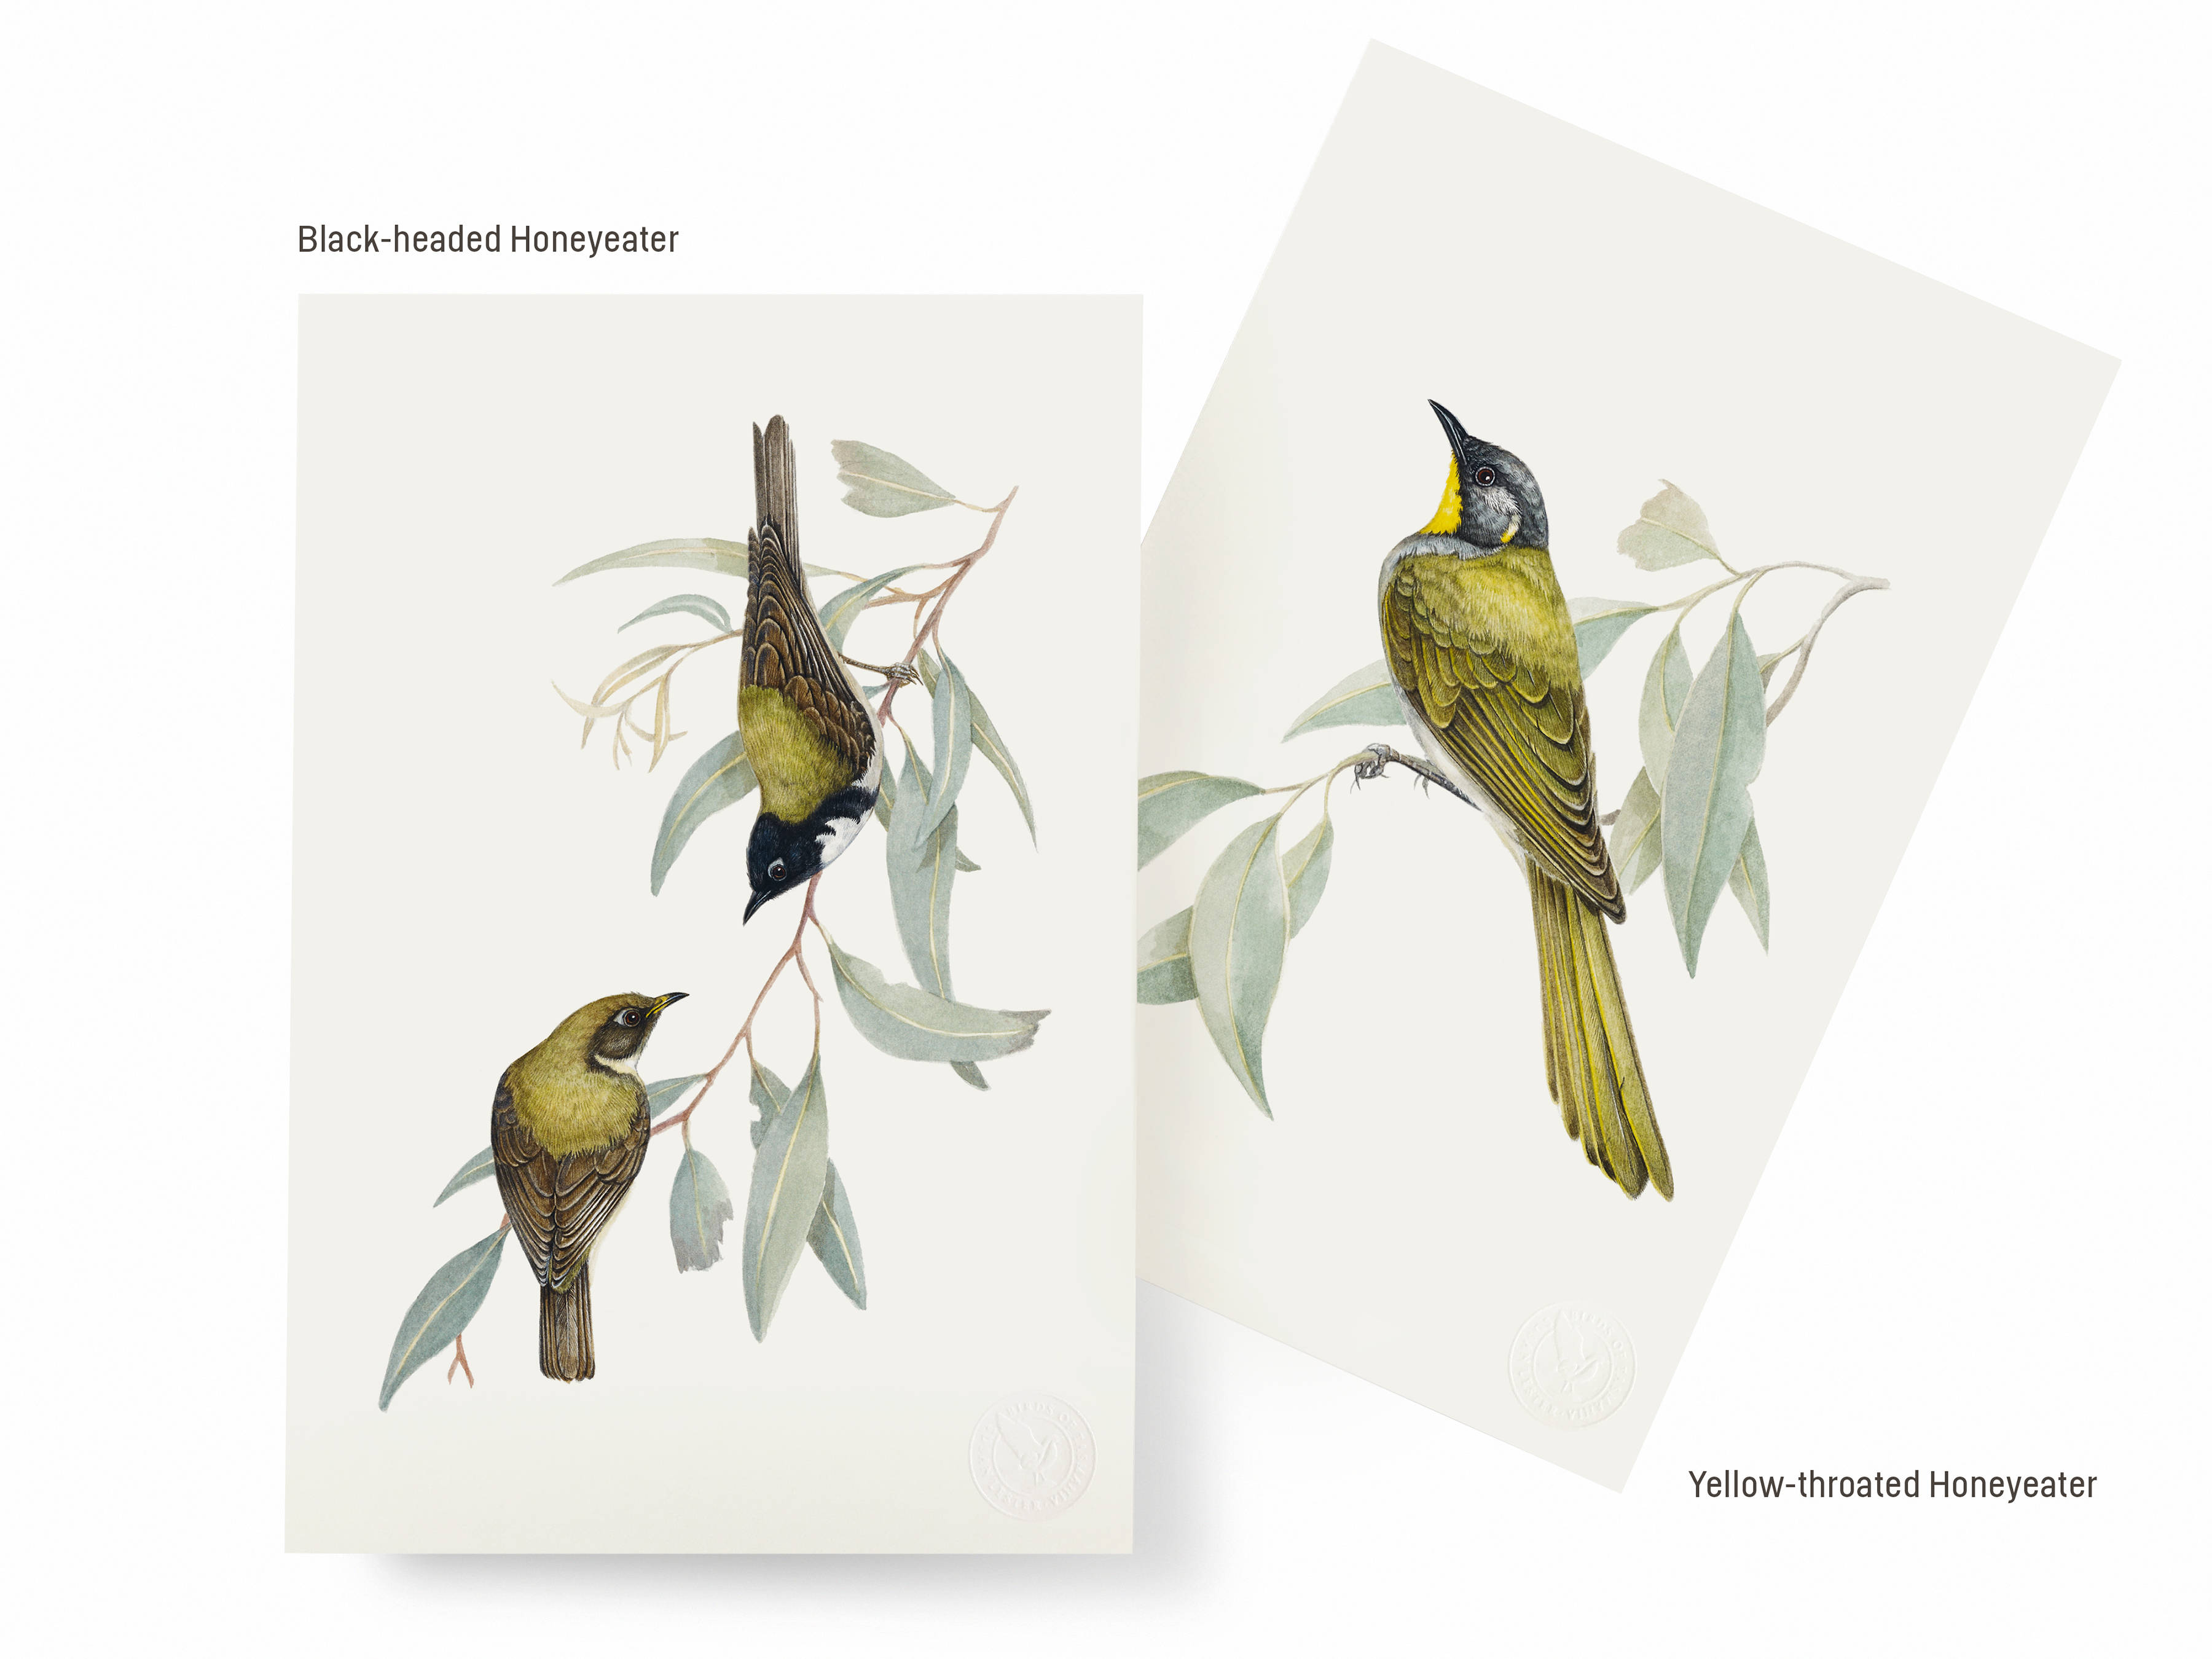 Two of the selection of six artworks available as part of the special BOXED edition: Black-headed Honeyeater on the left, Yellow-throated Honeyeater on the right.